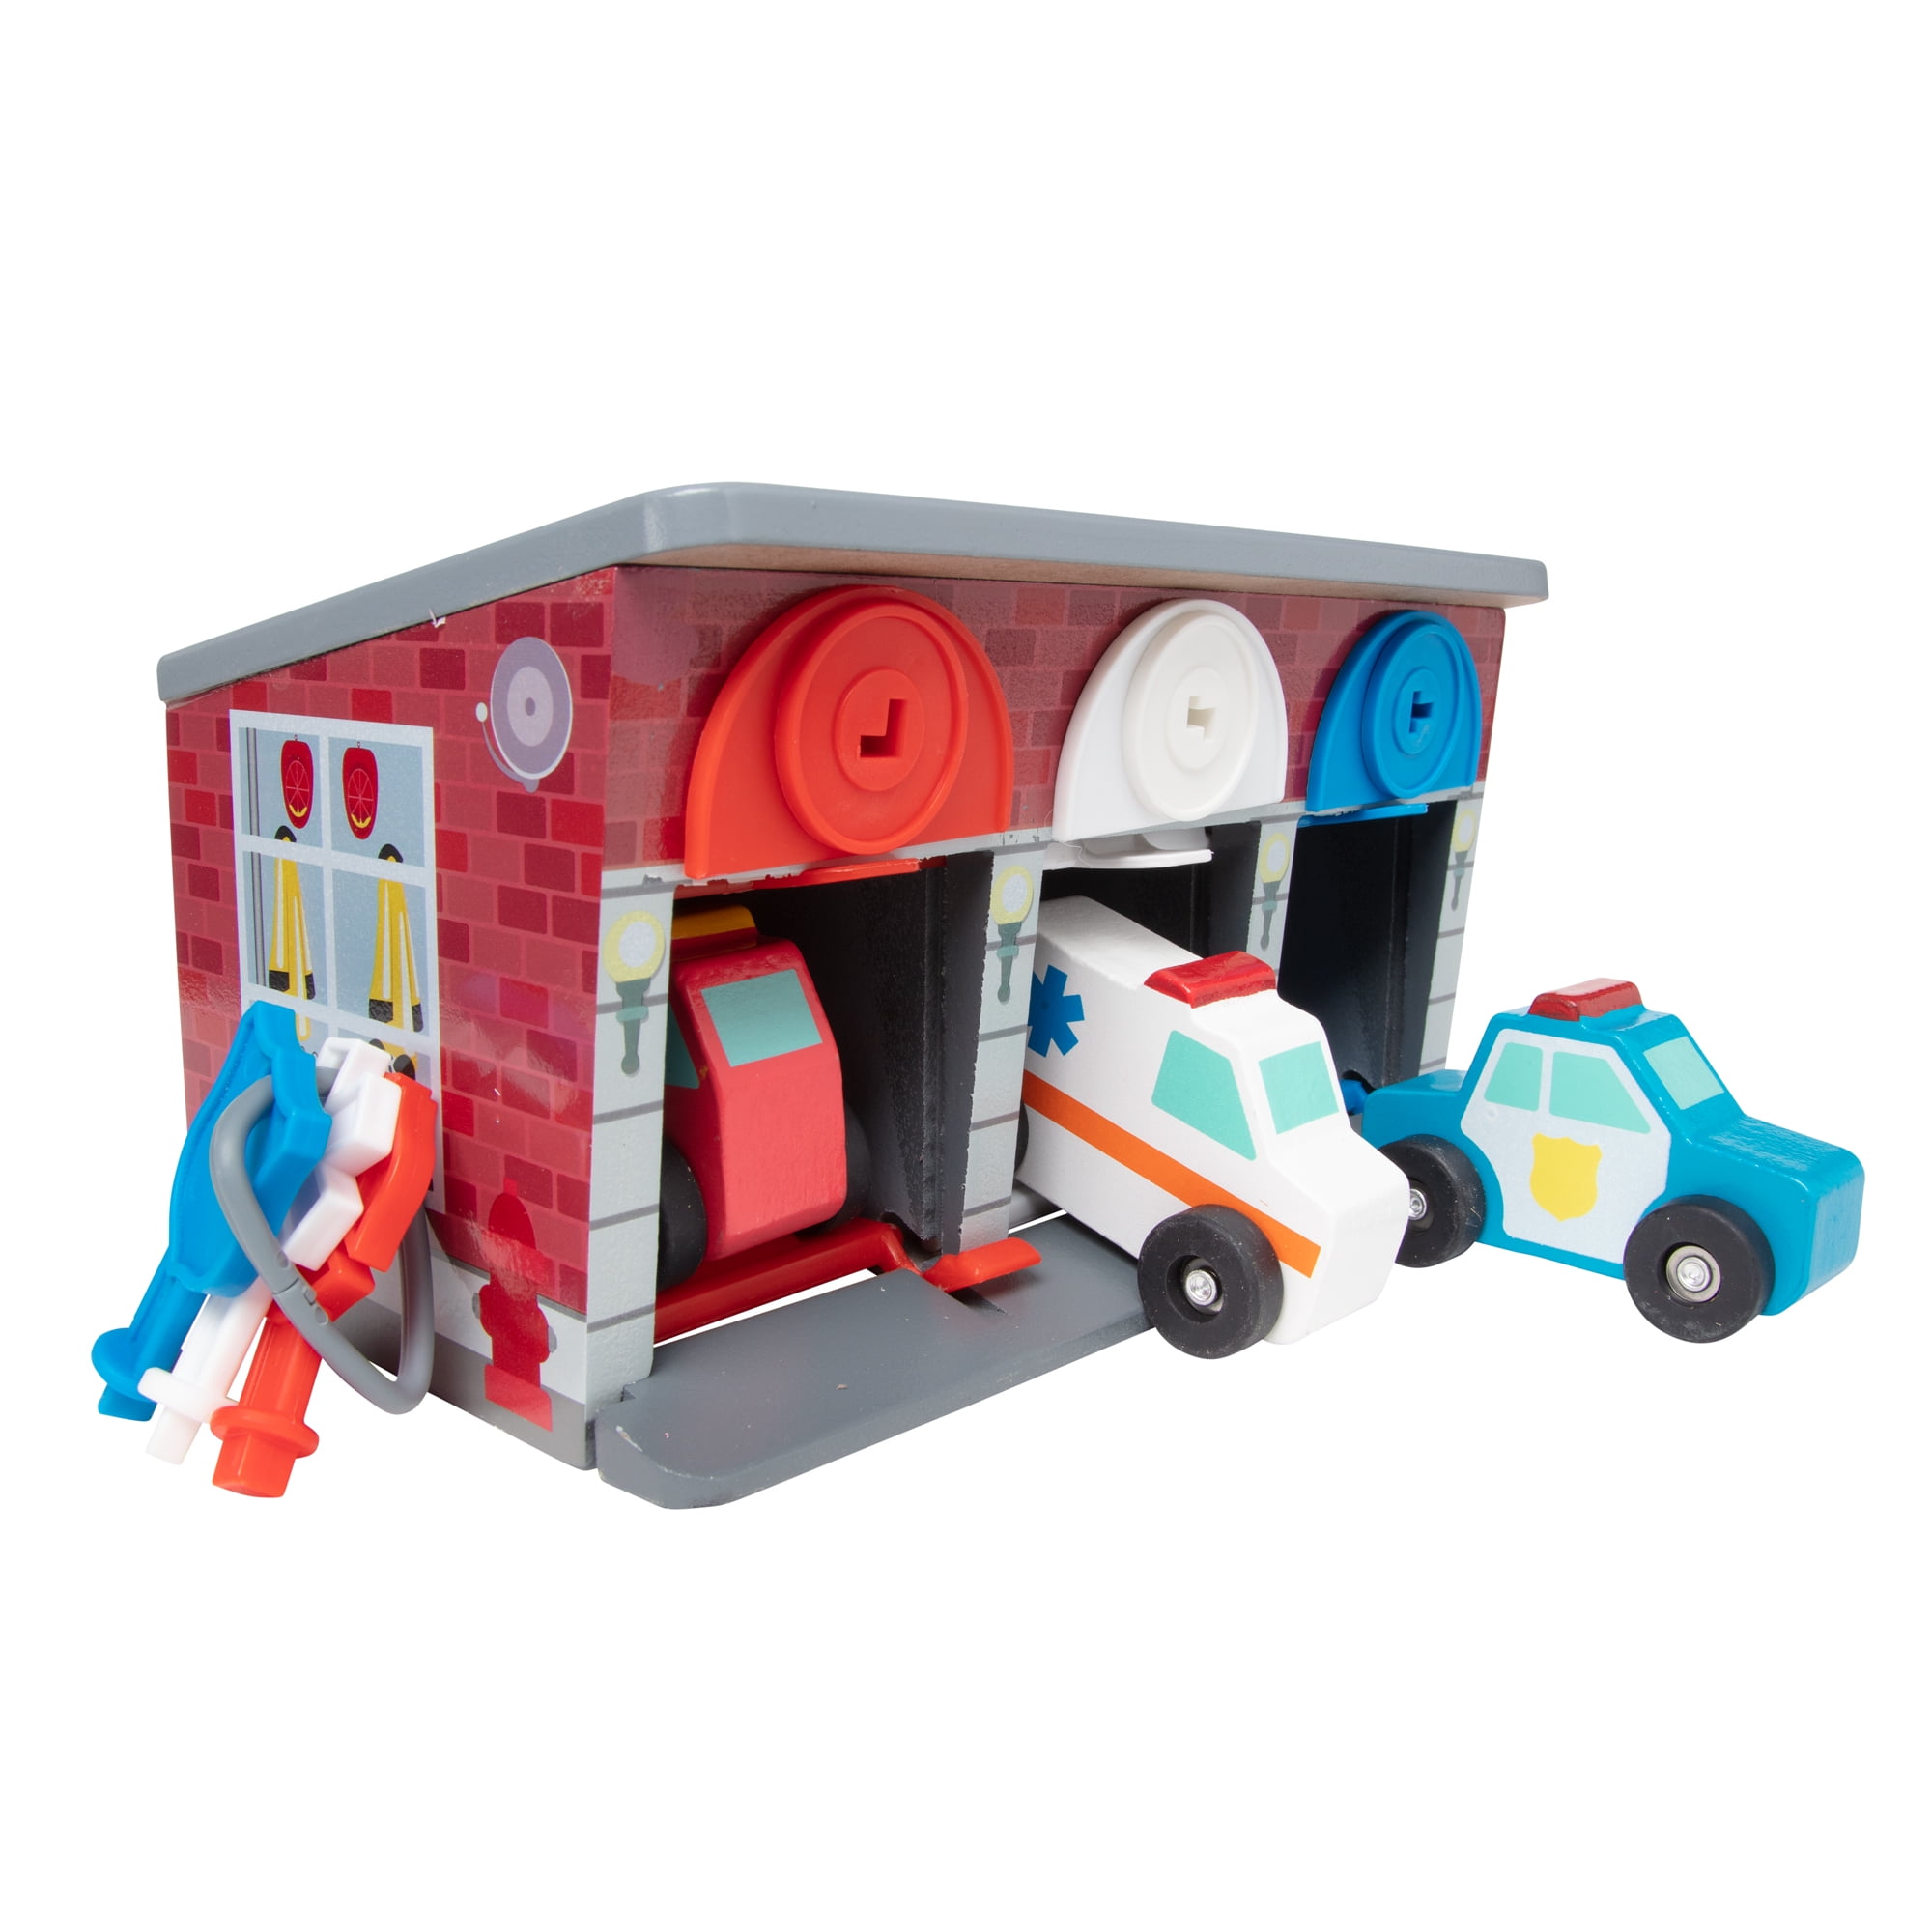 Excellent Copy of a Deluxe Service Station Playset Cardboard Display 